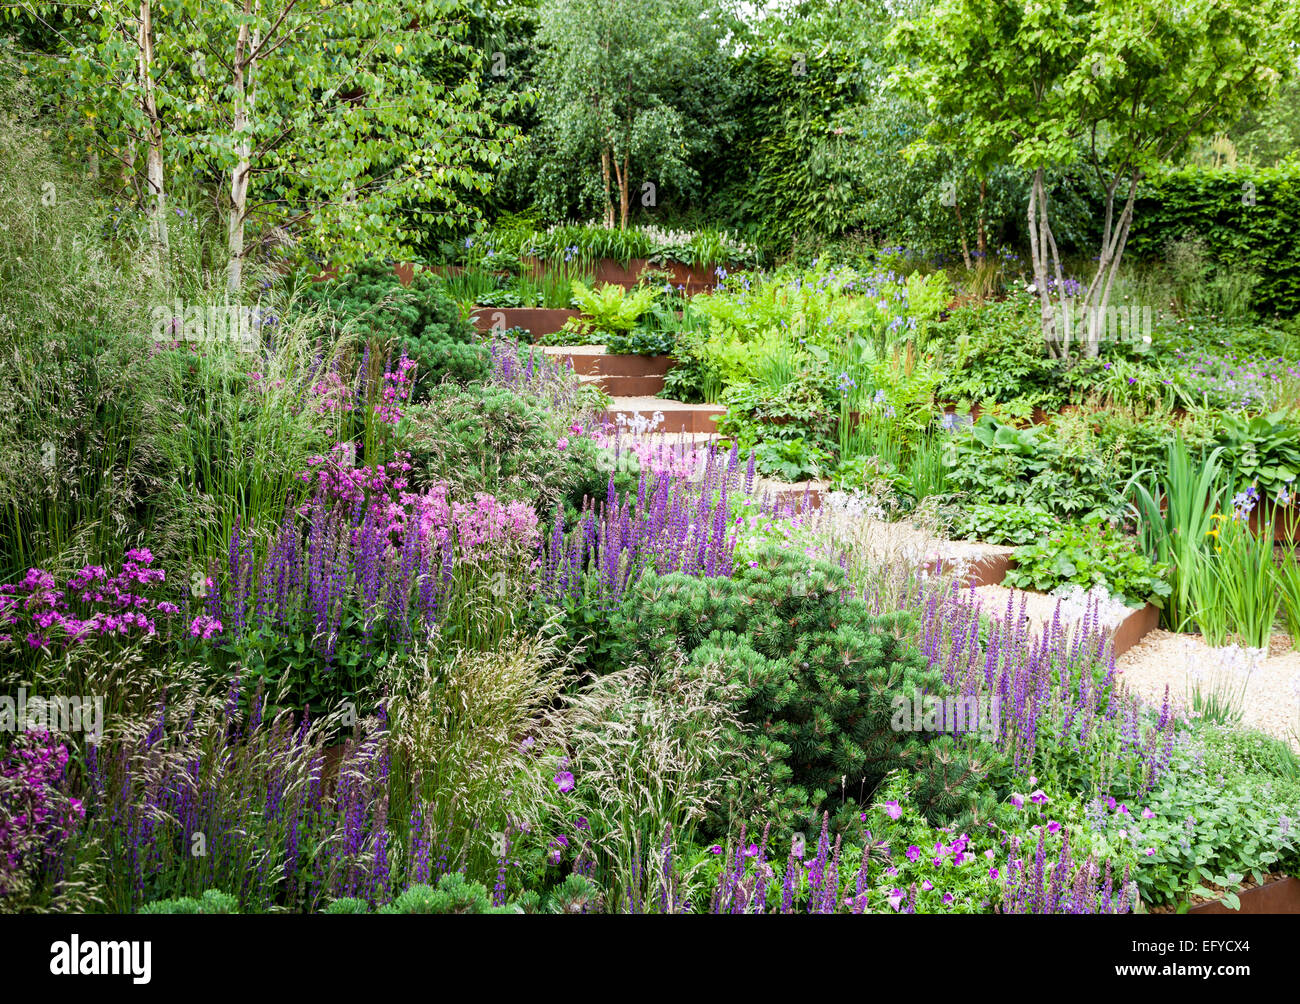 Gravel steps contained by corten steel leading through sloping garden featuring grasses, small conifers, pink and blue perennial Stock Photo